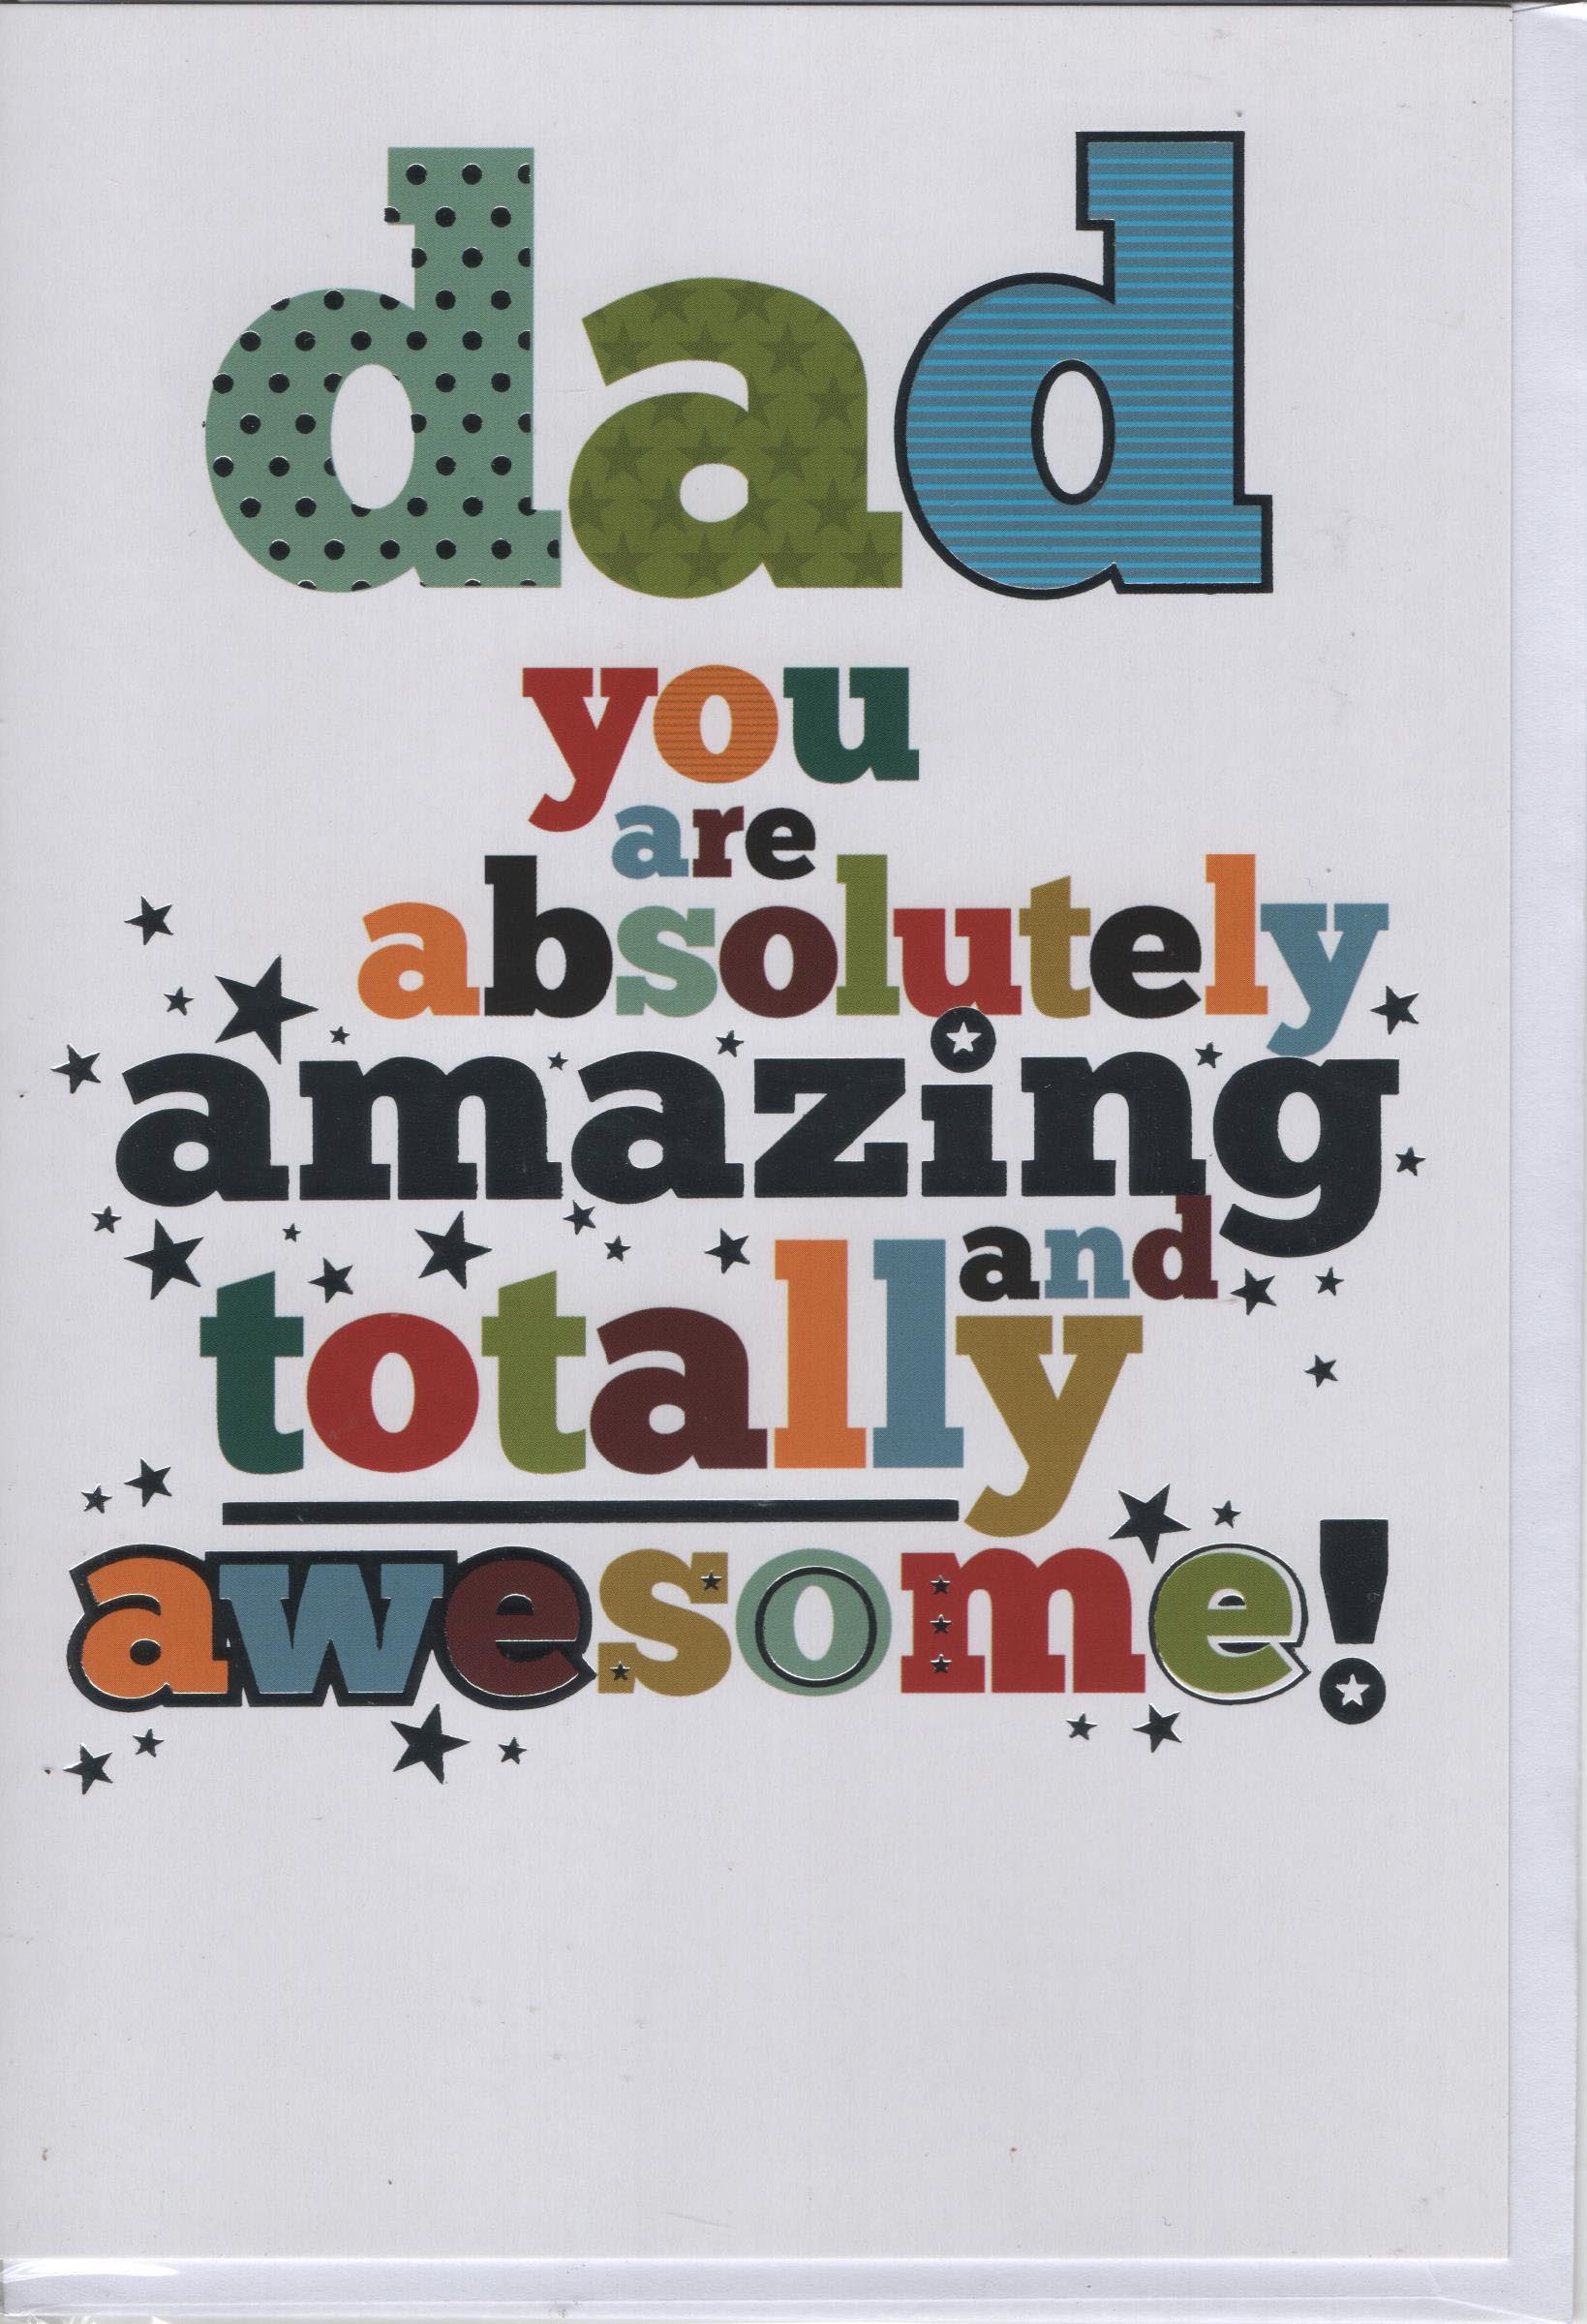 Dad You are absolutely amazing totally awesome!